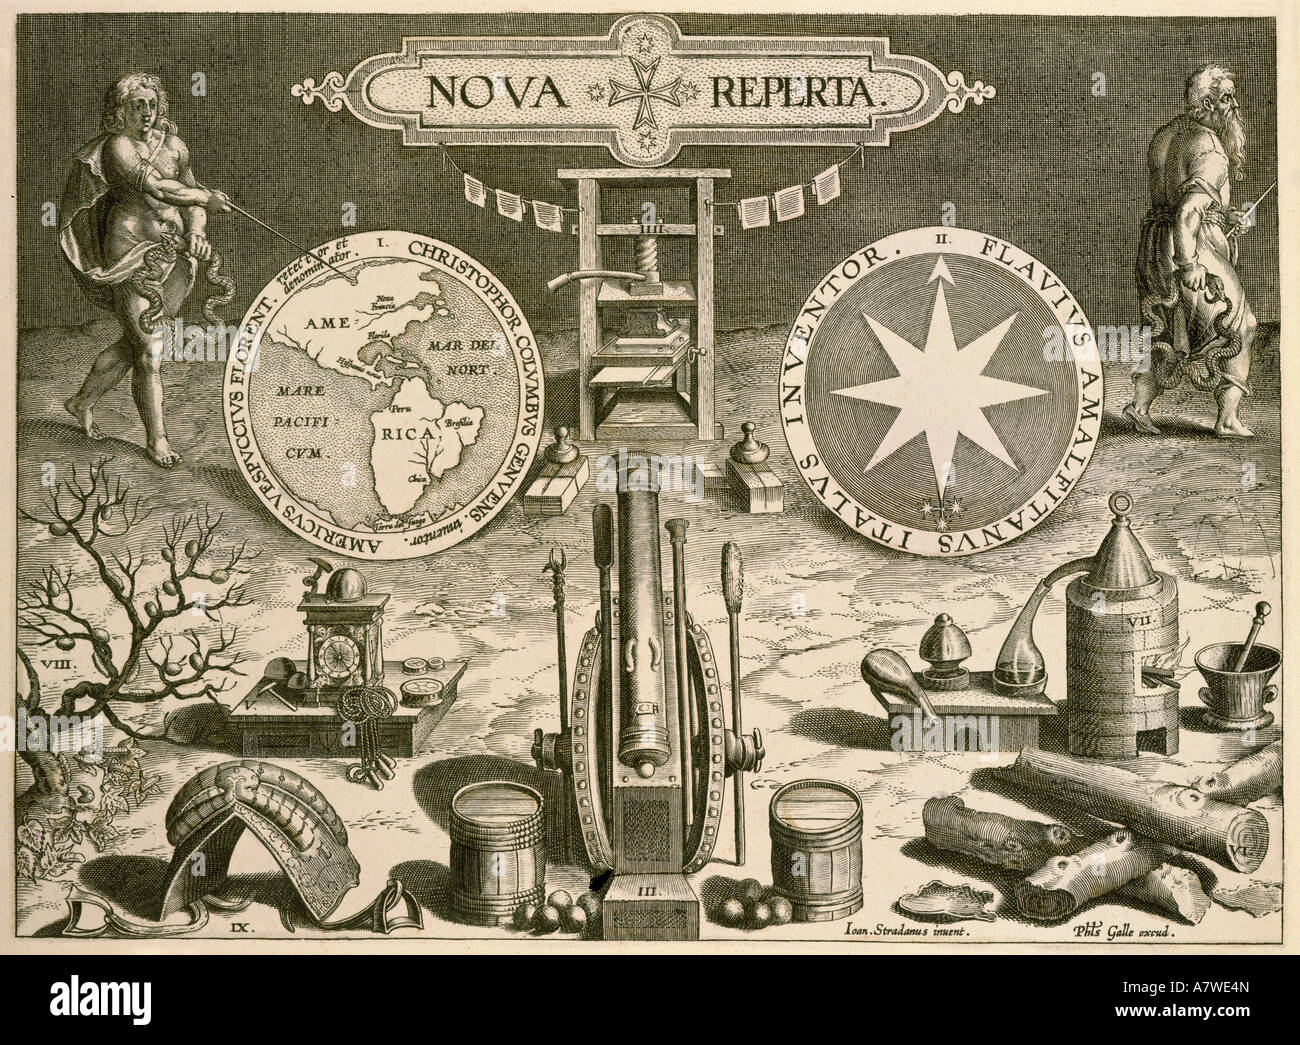 Straet, Jan van der, 1523 - 11.2.1605, Flemish painter, works, 'Nova Reperta', title, engraving by Theodor Galle or Jan Collart, circa 1580, private collection, , Artist's Copyright has not to be cleared Stock Photo